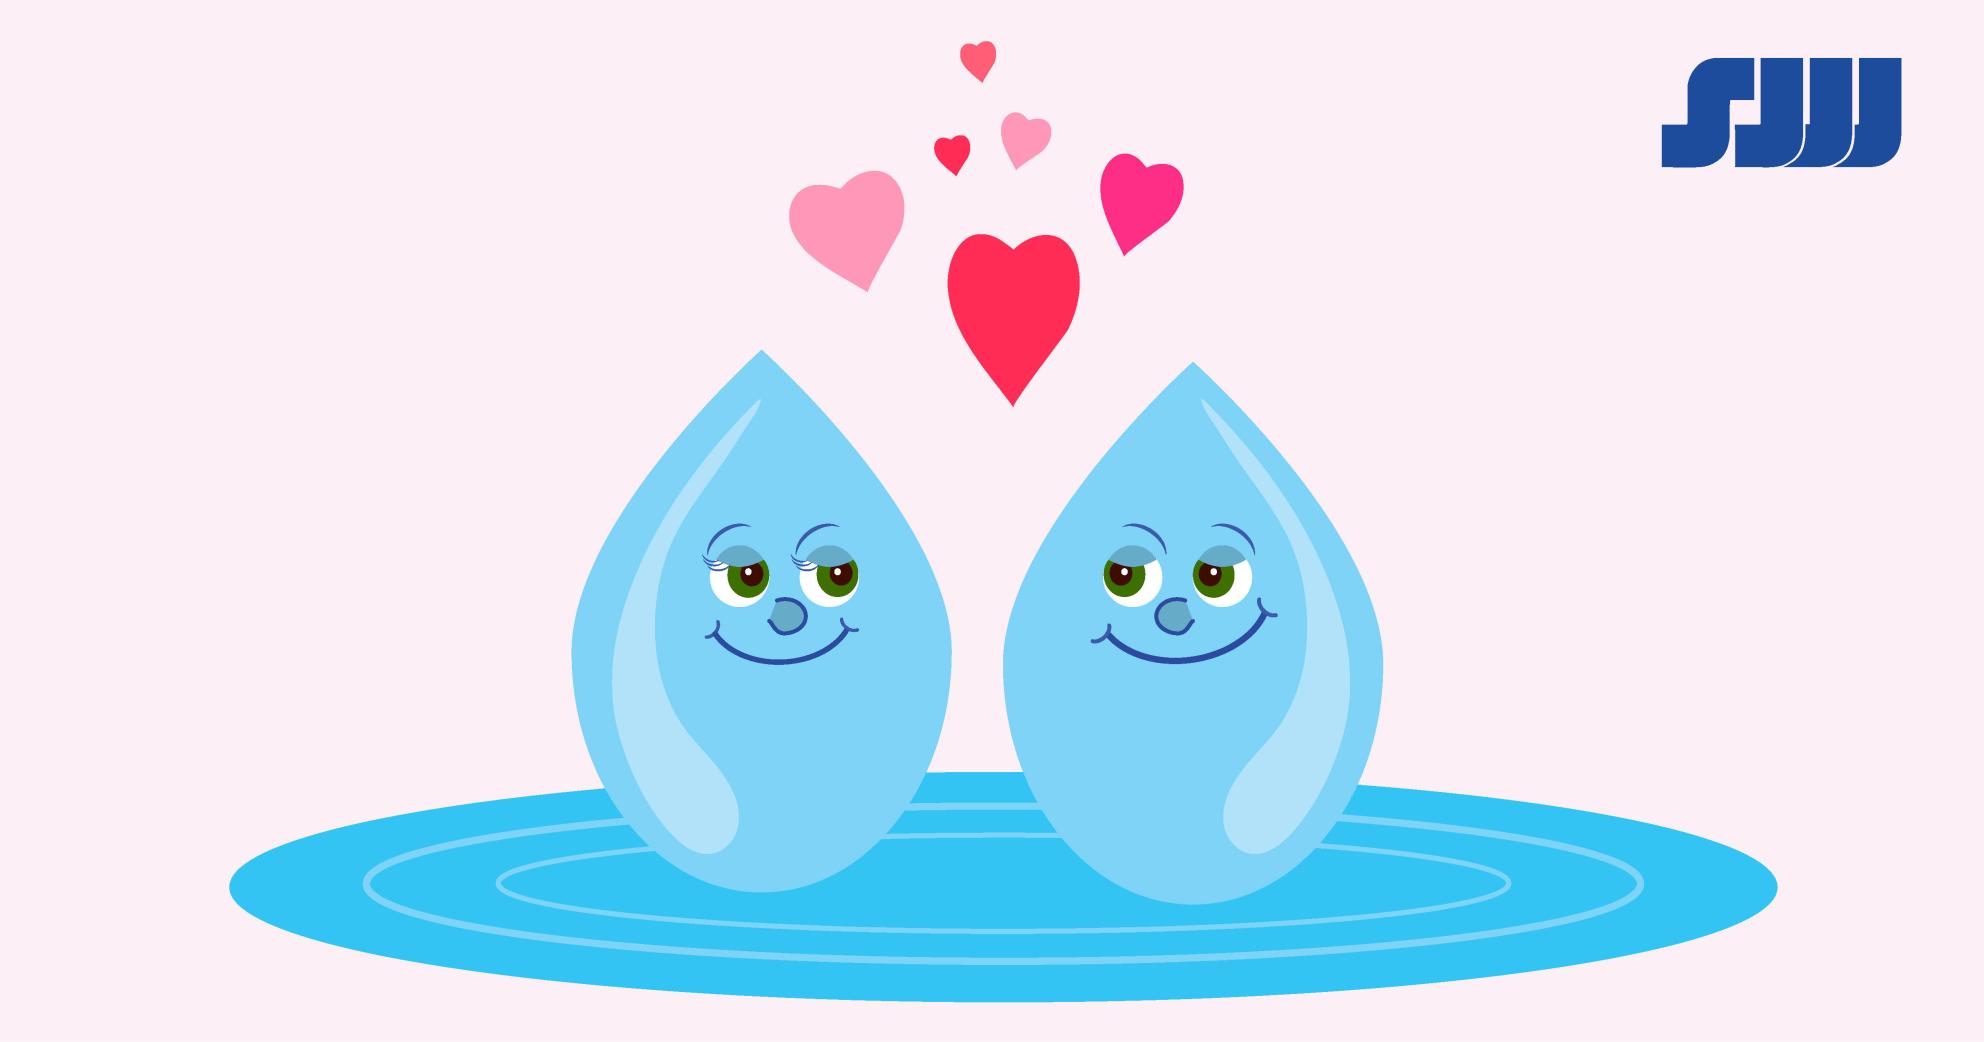 Cartoon image of two smiling water drops looking at each other with hearts rising between them